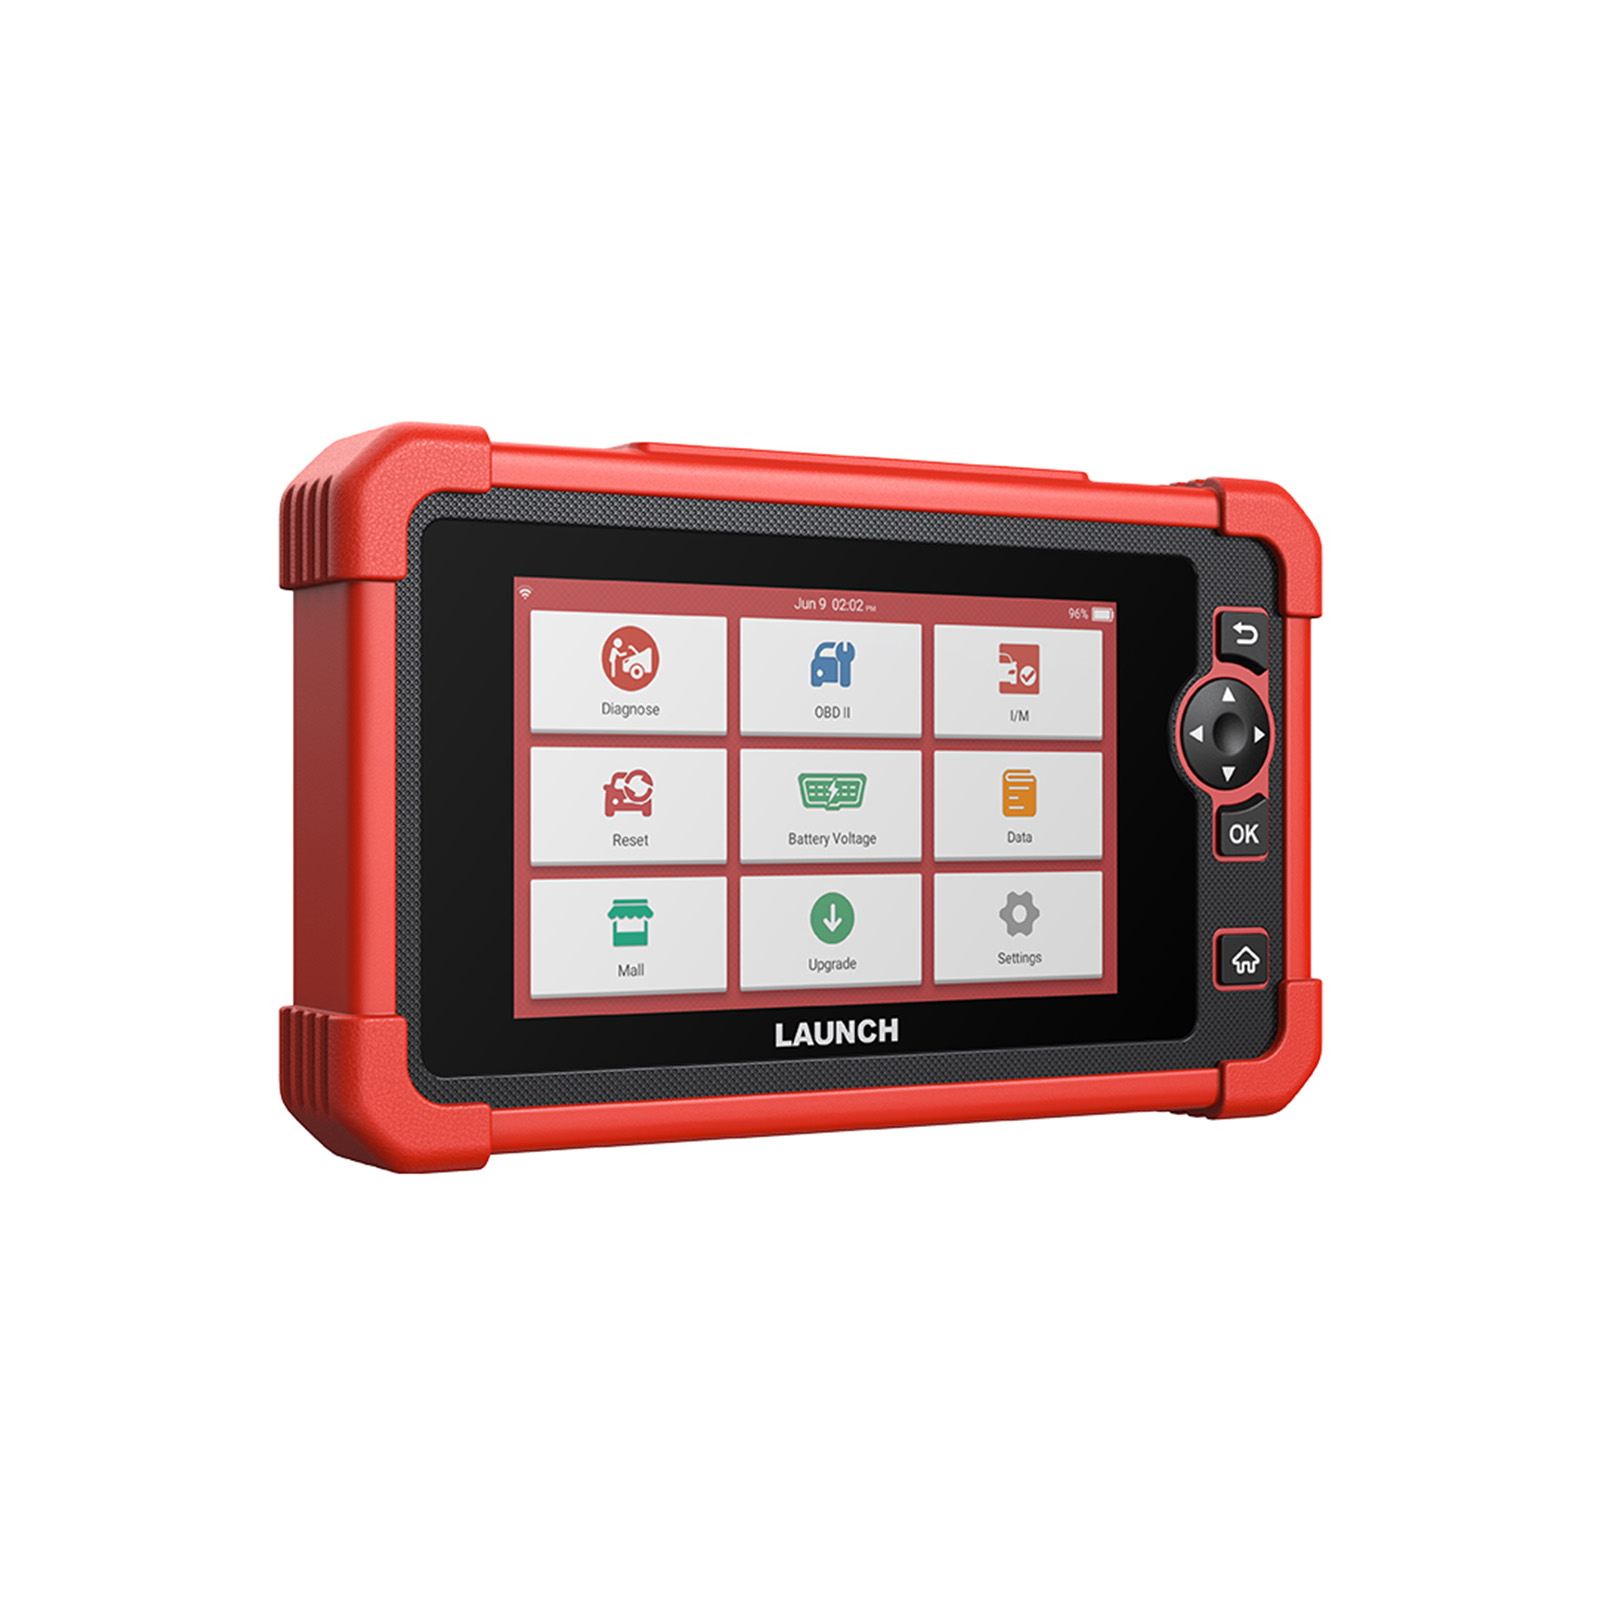 Wholesale 2023 Launch X431 V CRP919E BT Automotive Scanner Engine All  System OBD2 Diagnostic Tools 31 Resets Lifetime Free Update From  m.